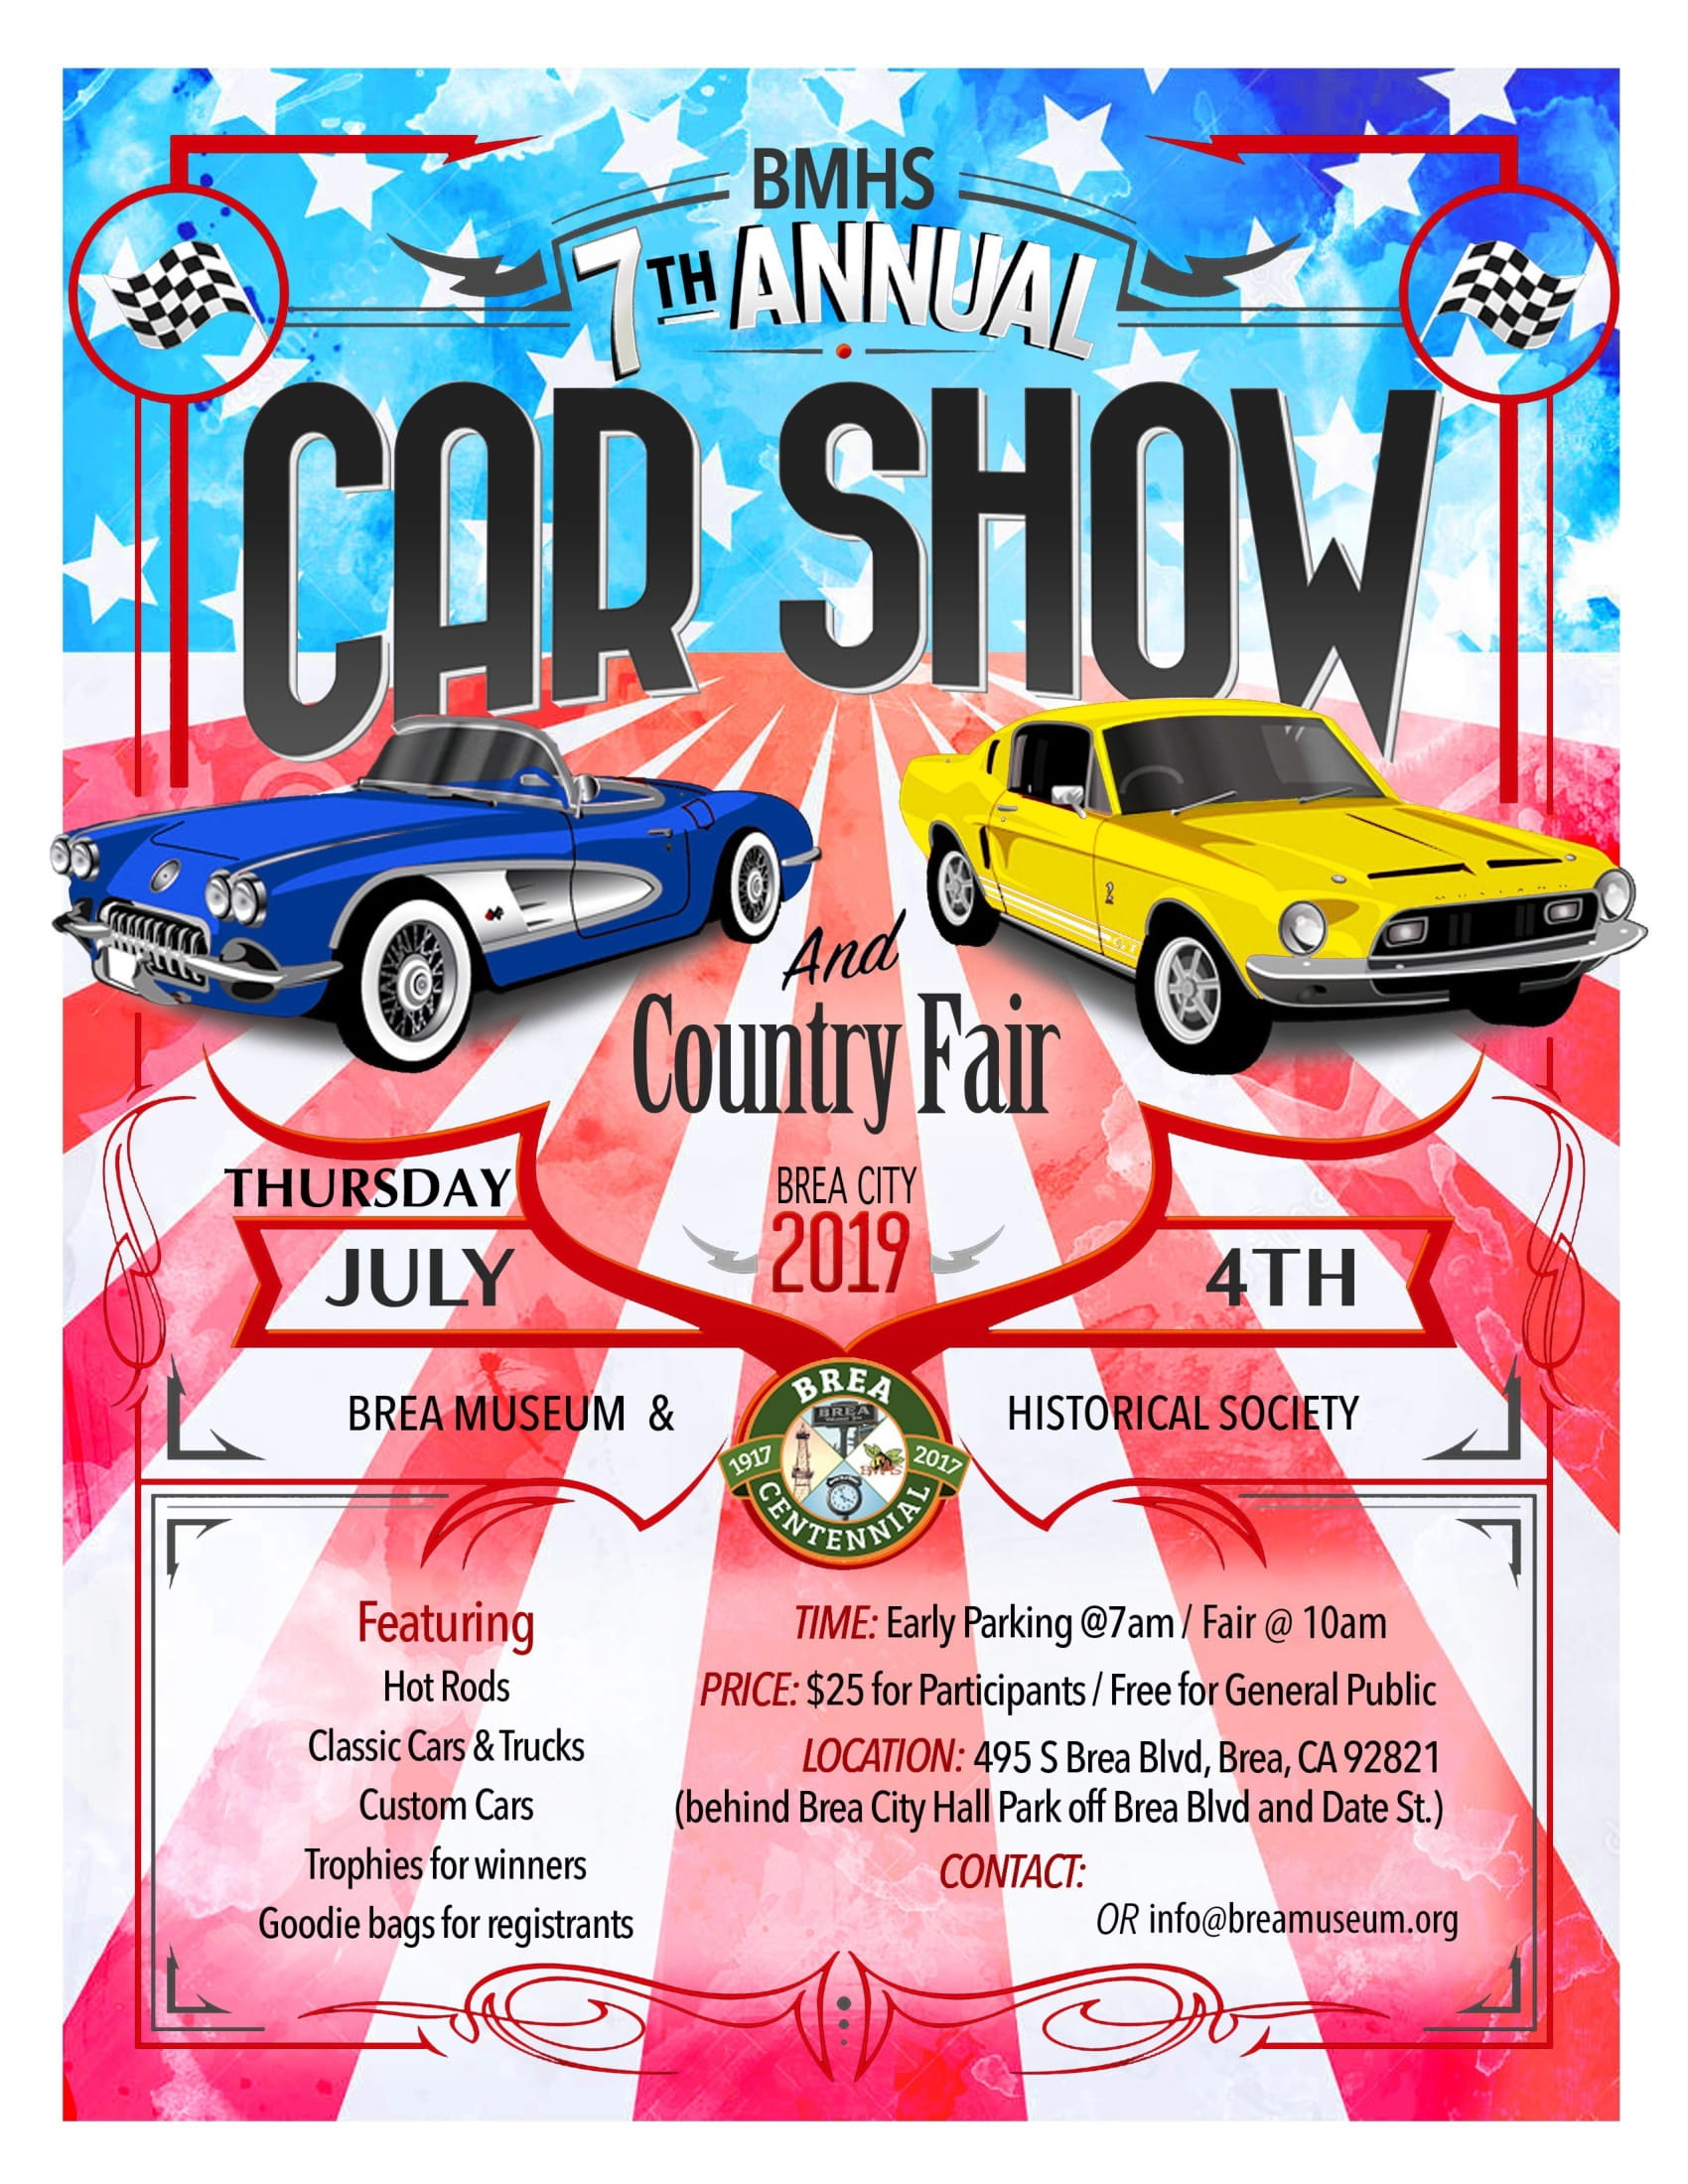 Country Fair Car Show Flyer 2019 front1 Brea Museum & Historical Society